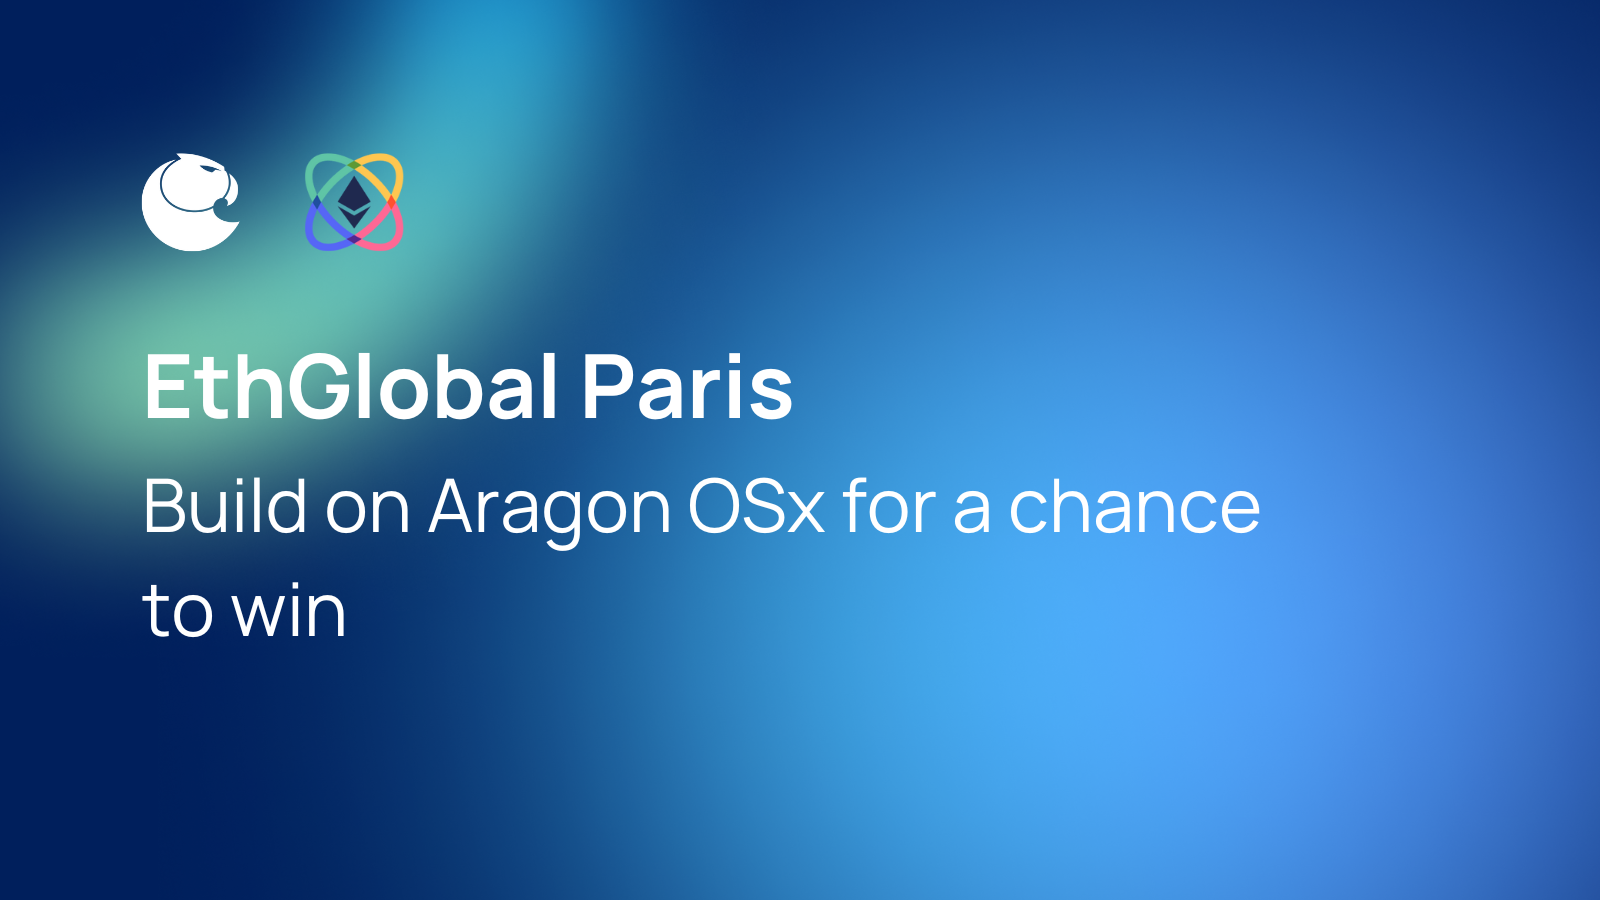 EthGlobal Paris: Build on Aragon OSx for a chance to win